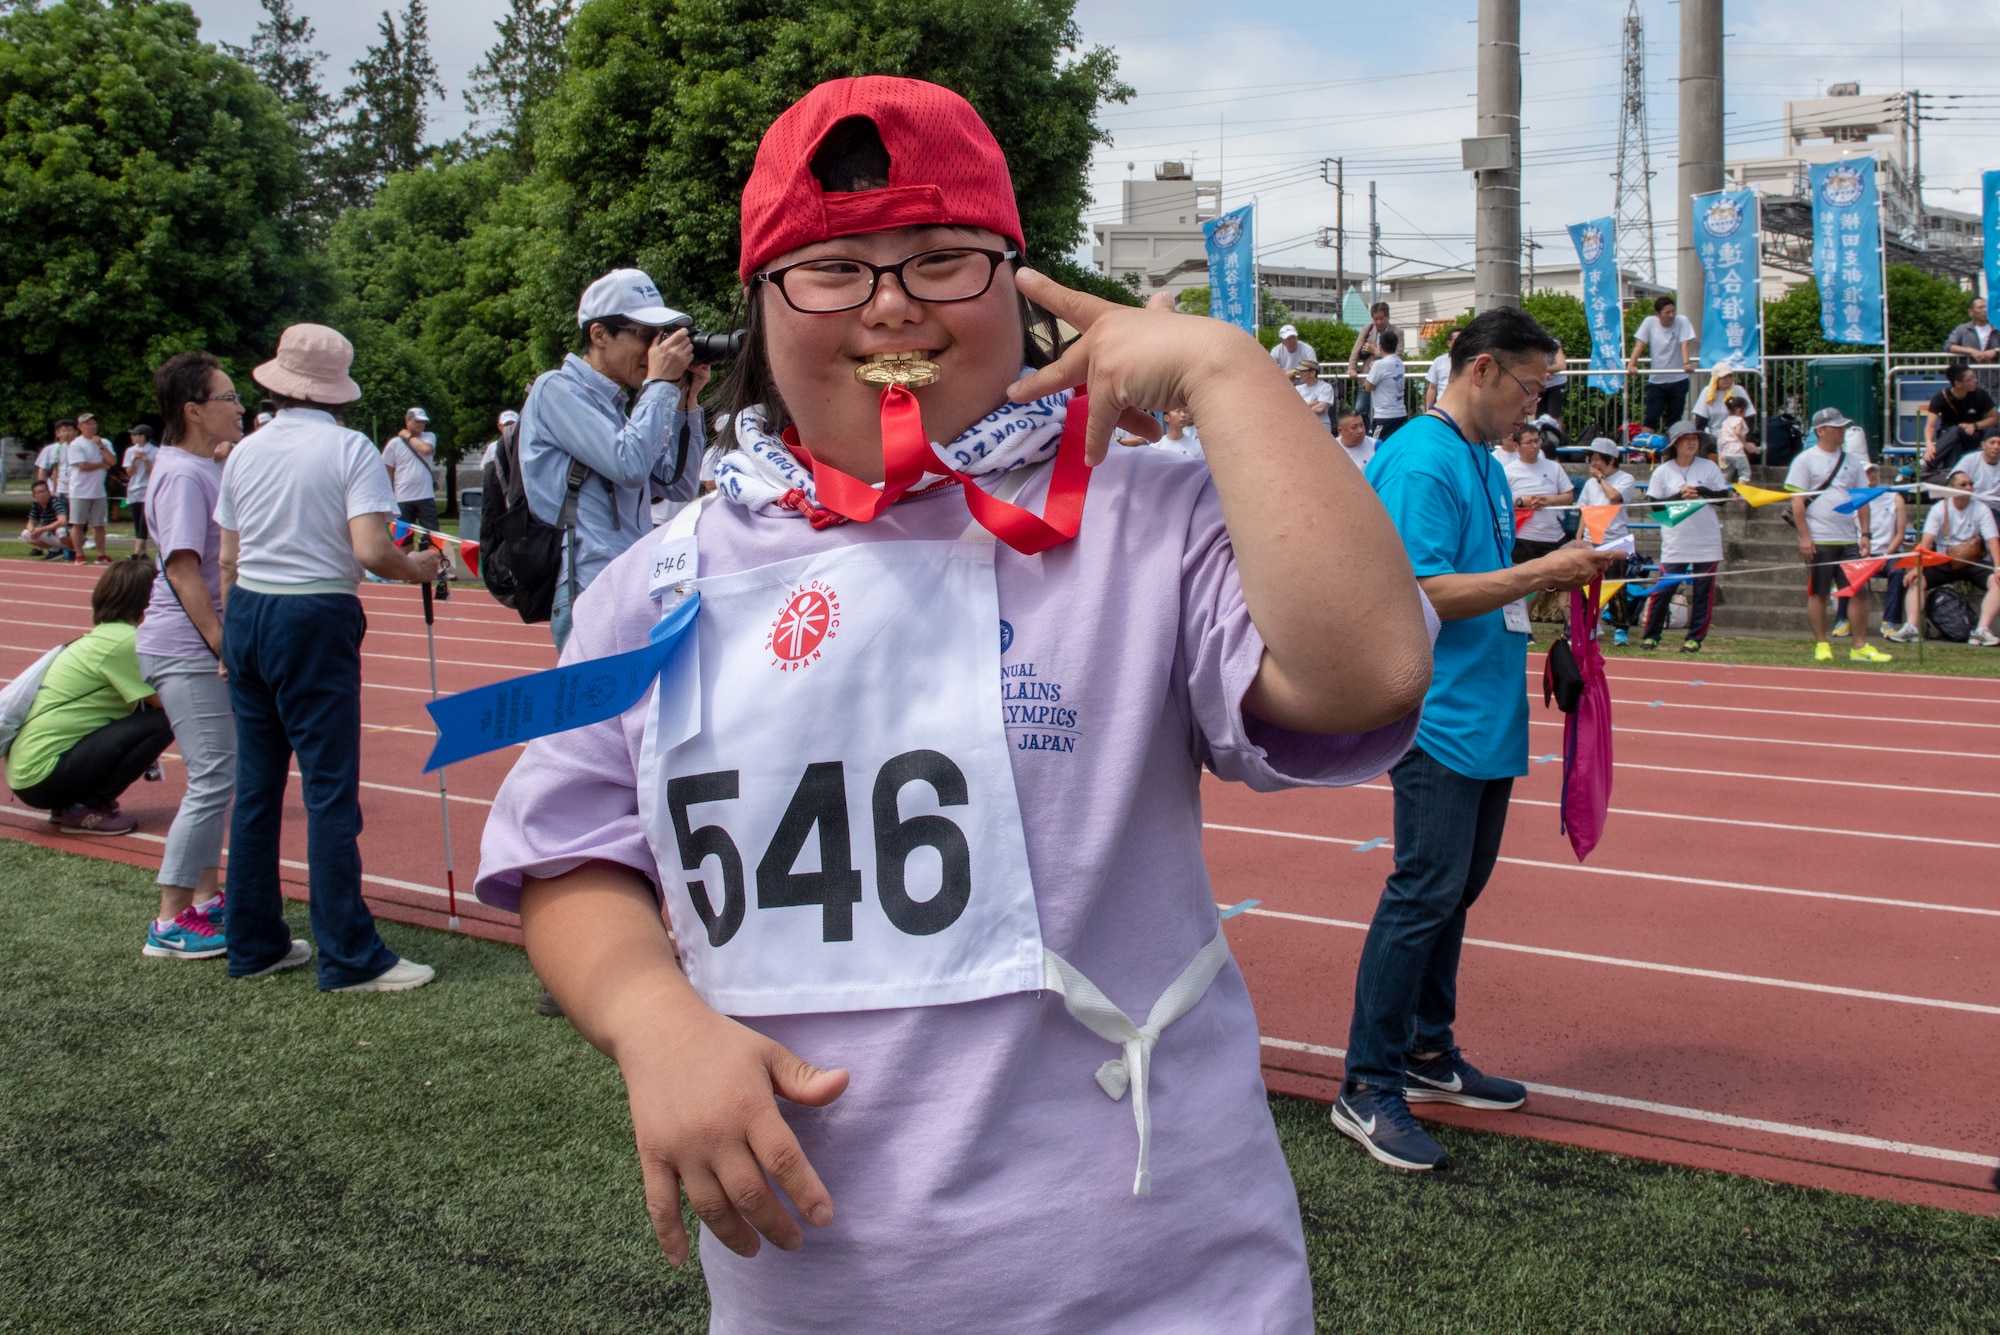 An athlete poses for a photo after winning gold in the 50 meter sprint during the Kanto Plains Special Olympics at Yokota Air Base, Japan, May 19, 2018.